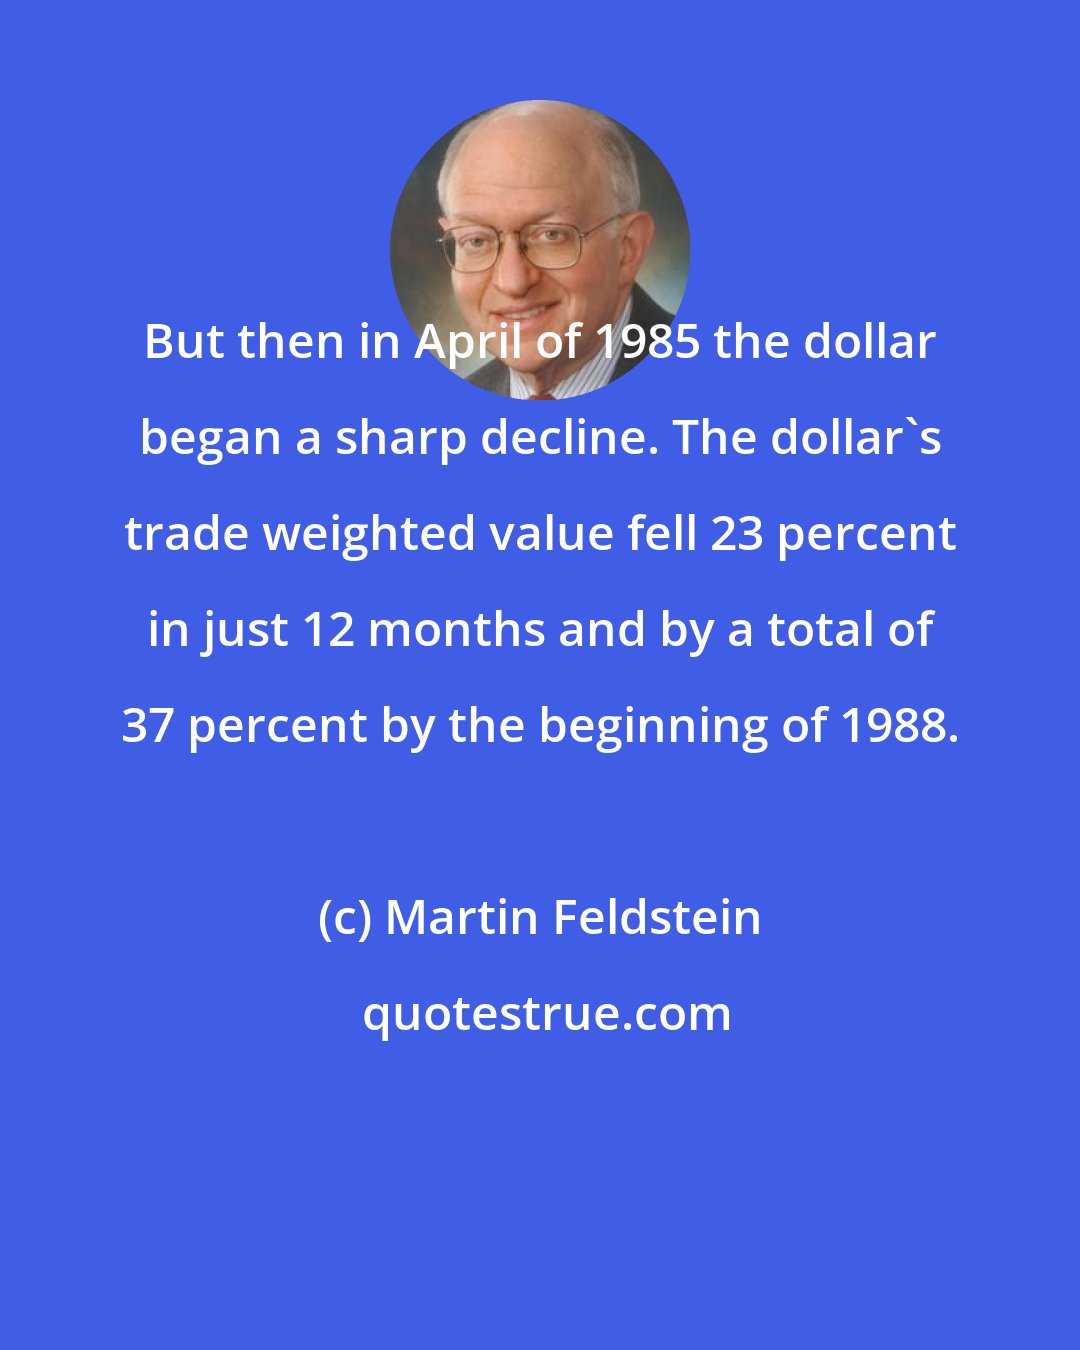 Martin Feldstein: But then in April of 1985 the dollar began a sharp decline. The dollar's trade weighted value fell 23 percent in just 12 months and by a total of 37 percent by the beginning of 1988.